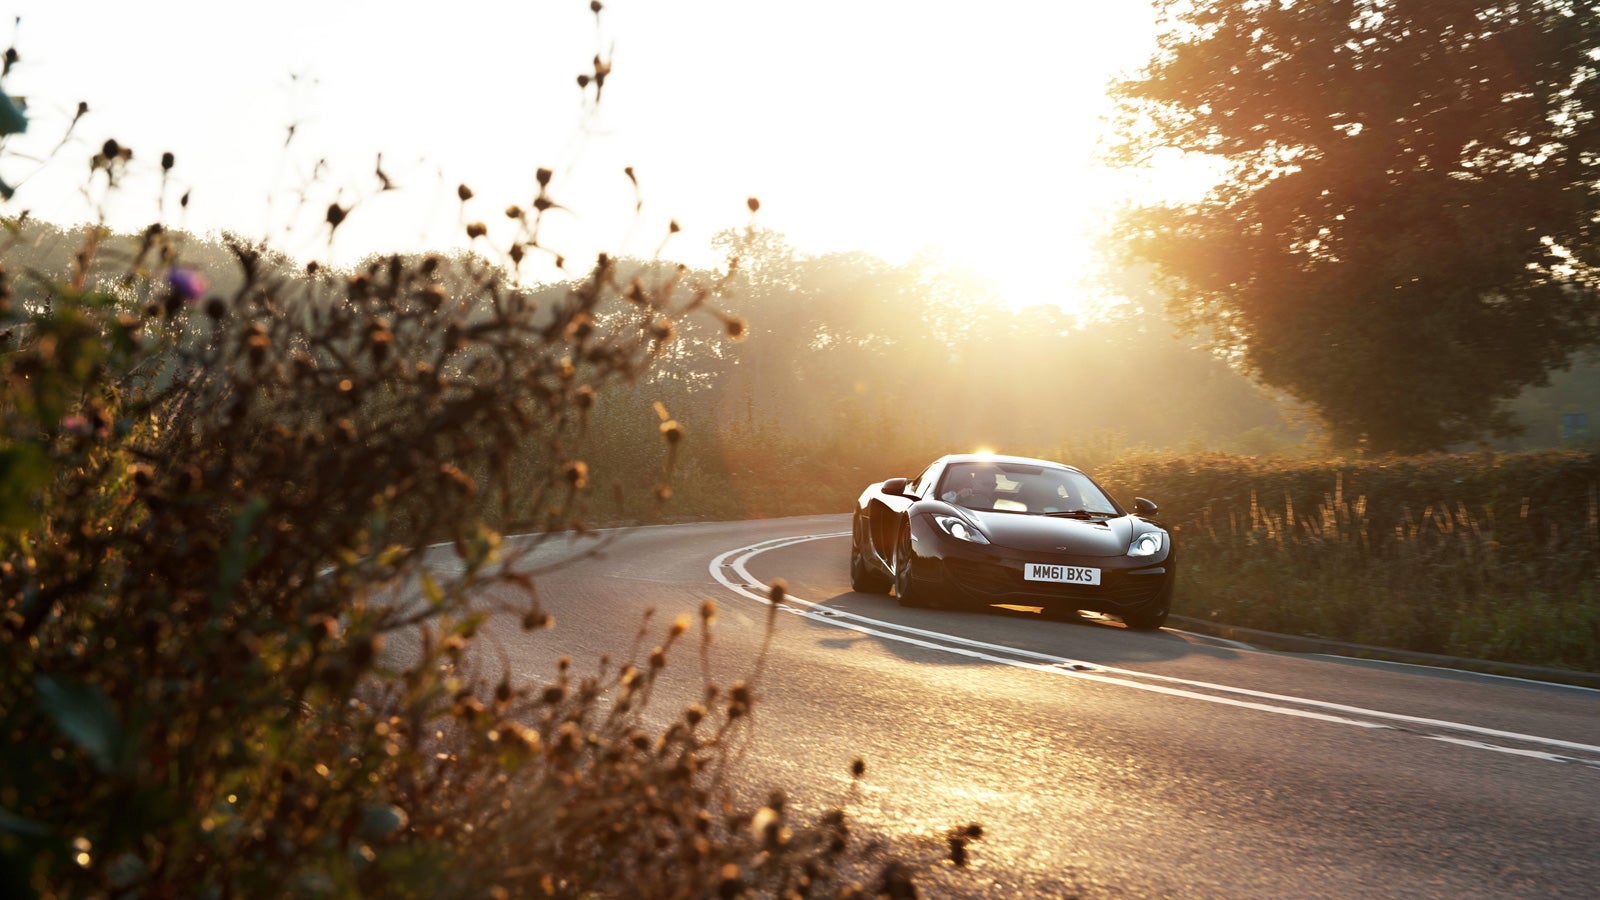 Your ridiculously cool McLaren MP4  12C Wallpaper  is here